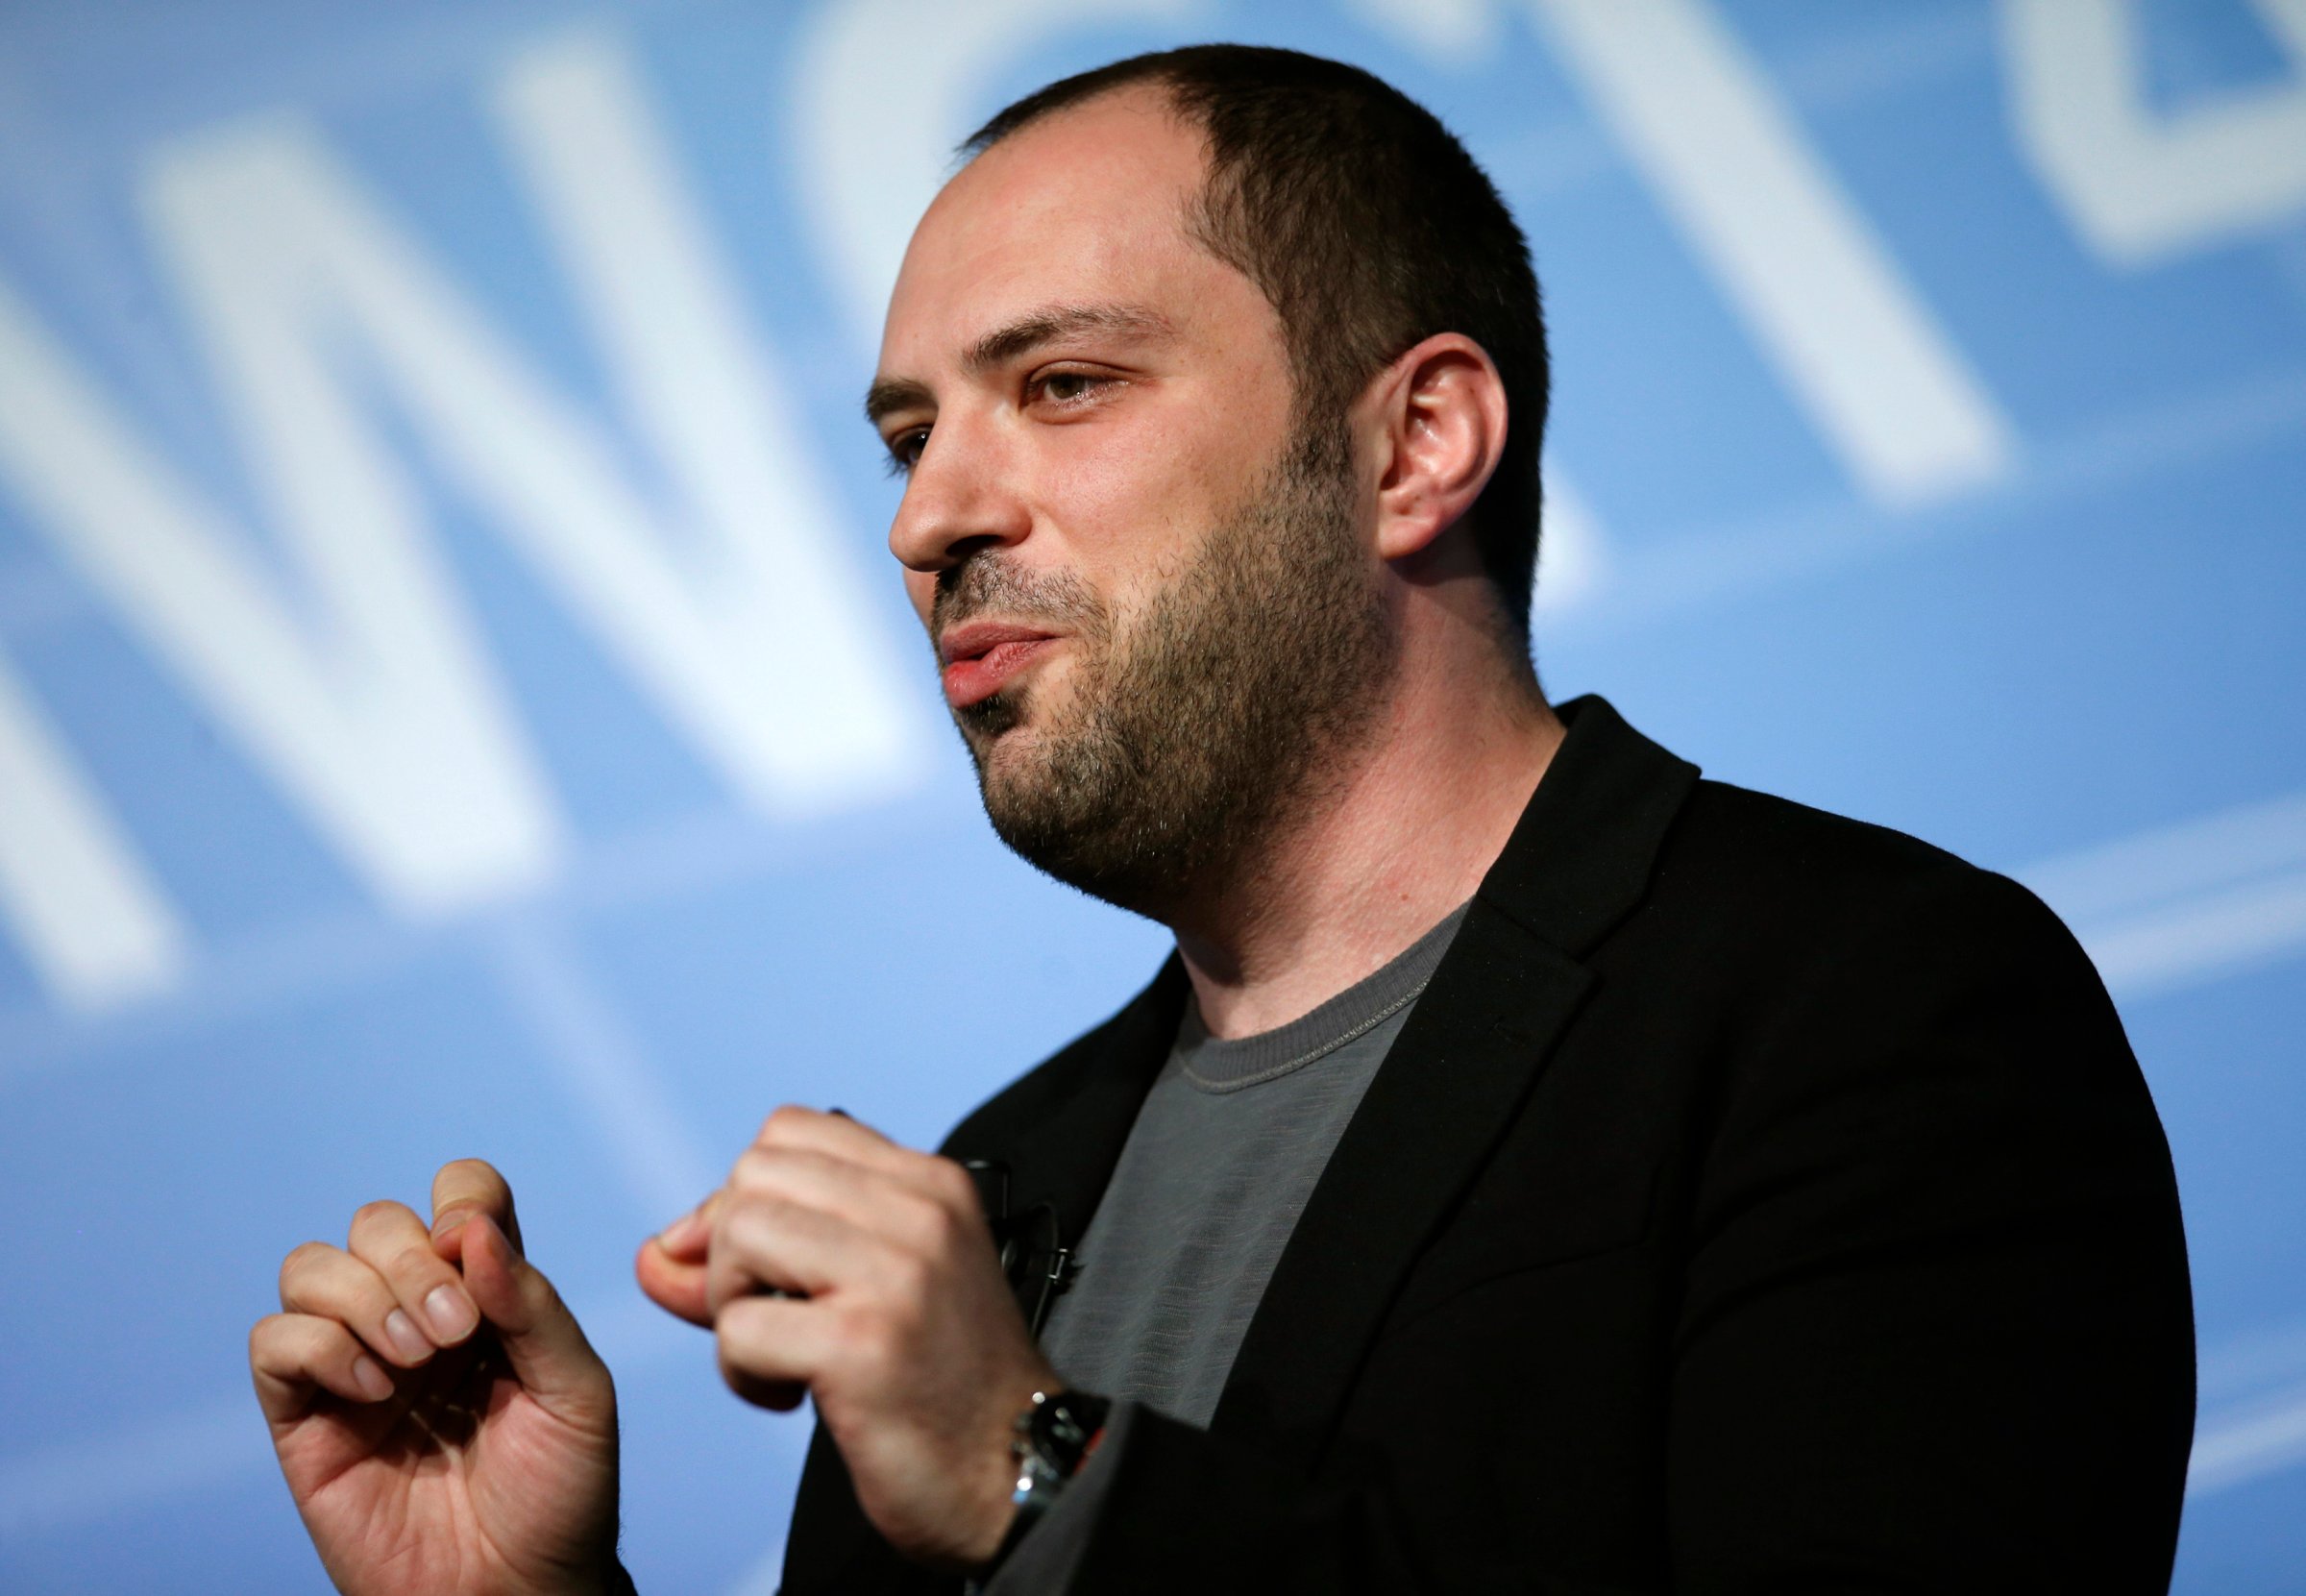 WhatsApp CEO and co-founder Jan Koum delivers a speech at the Mobile World Congress in Barcelona